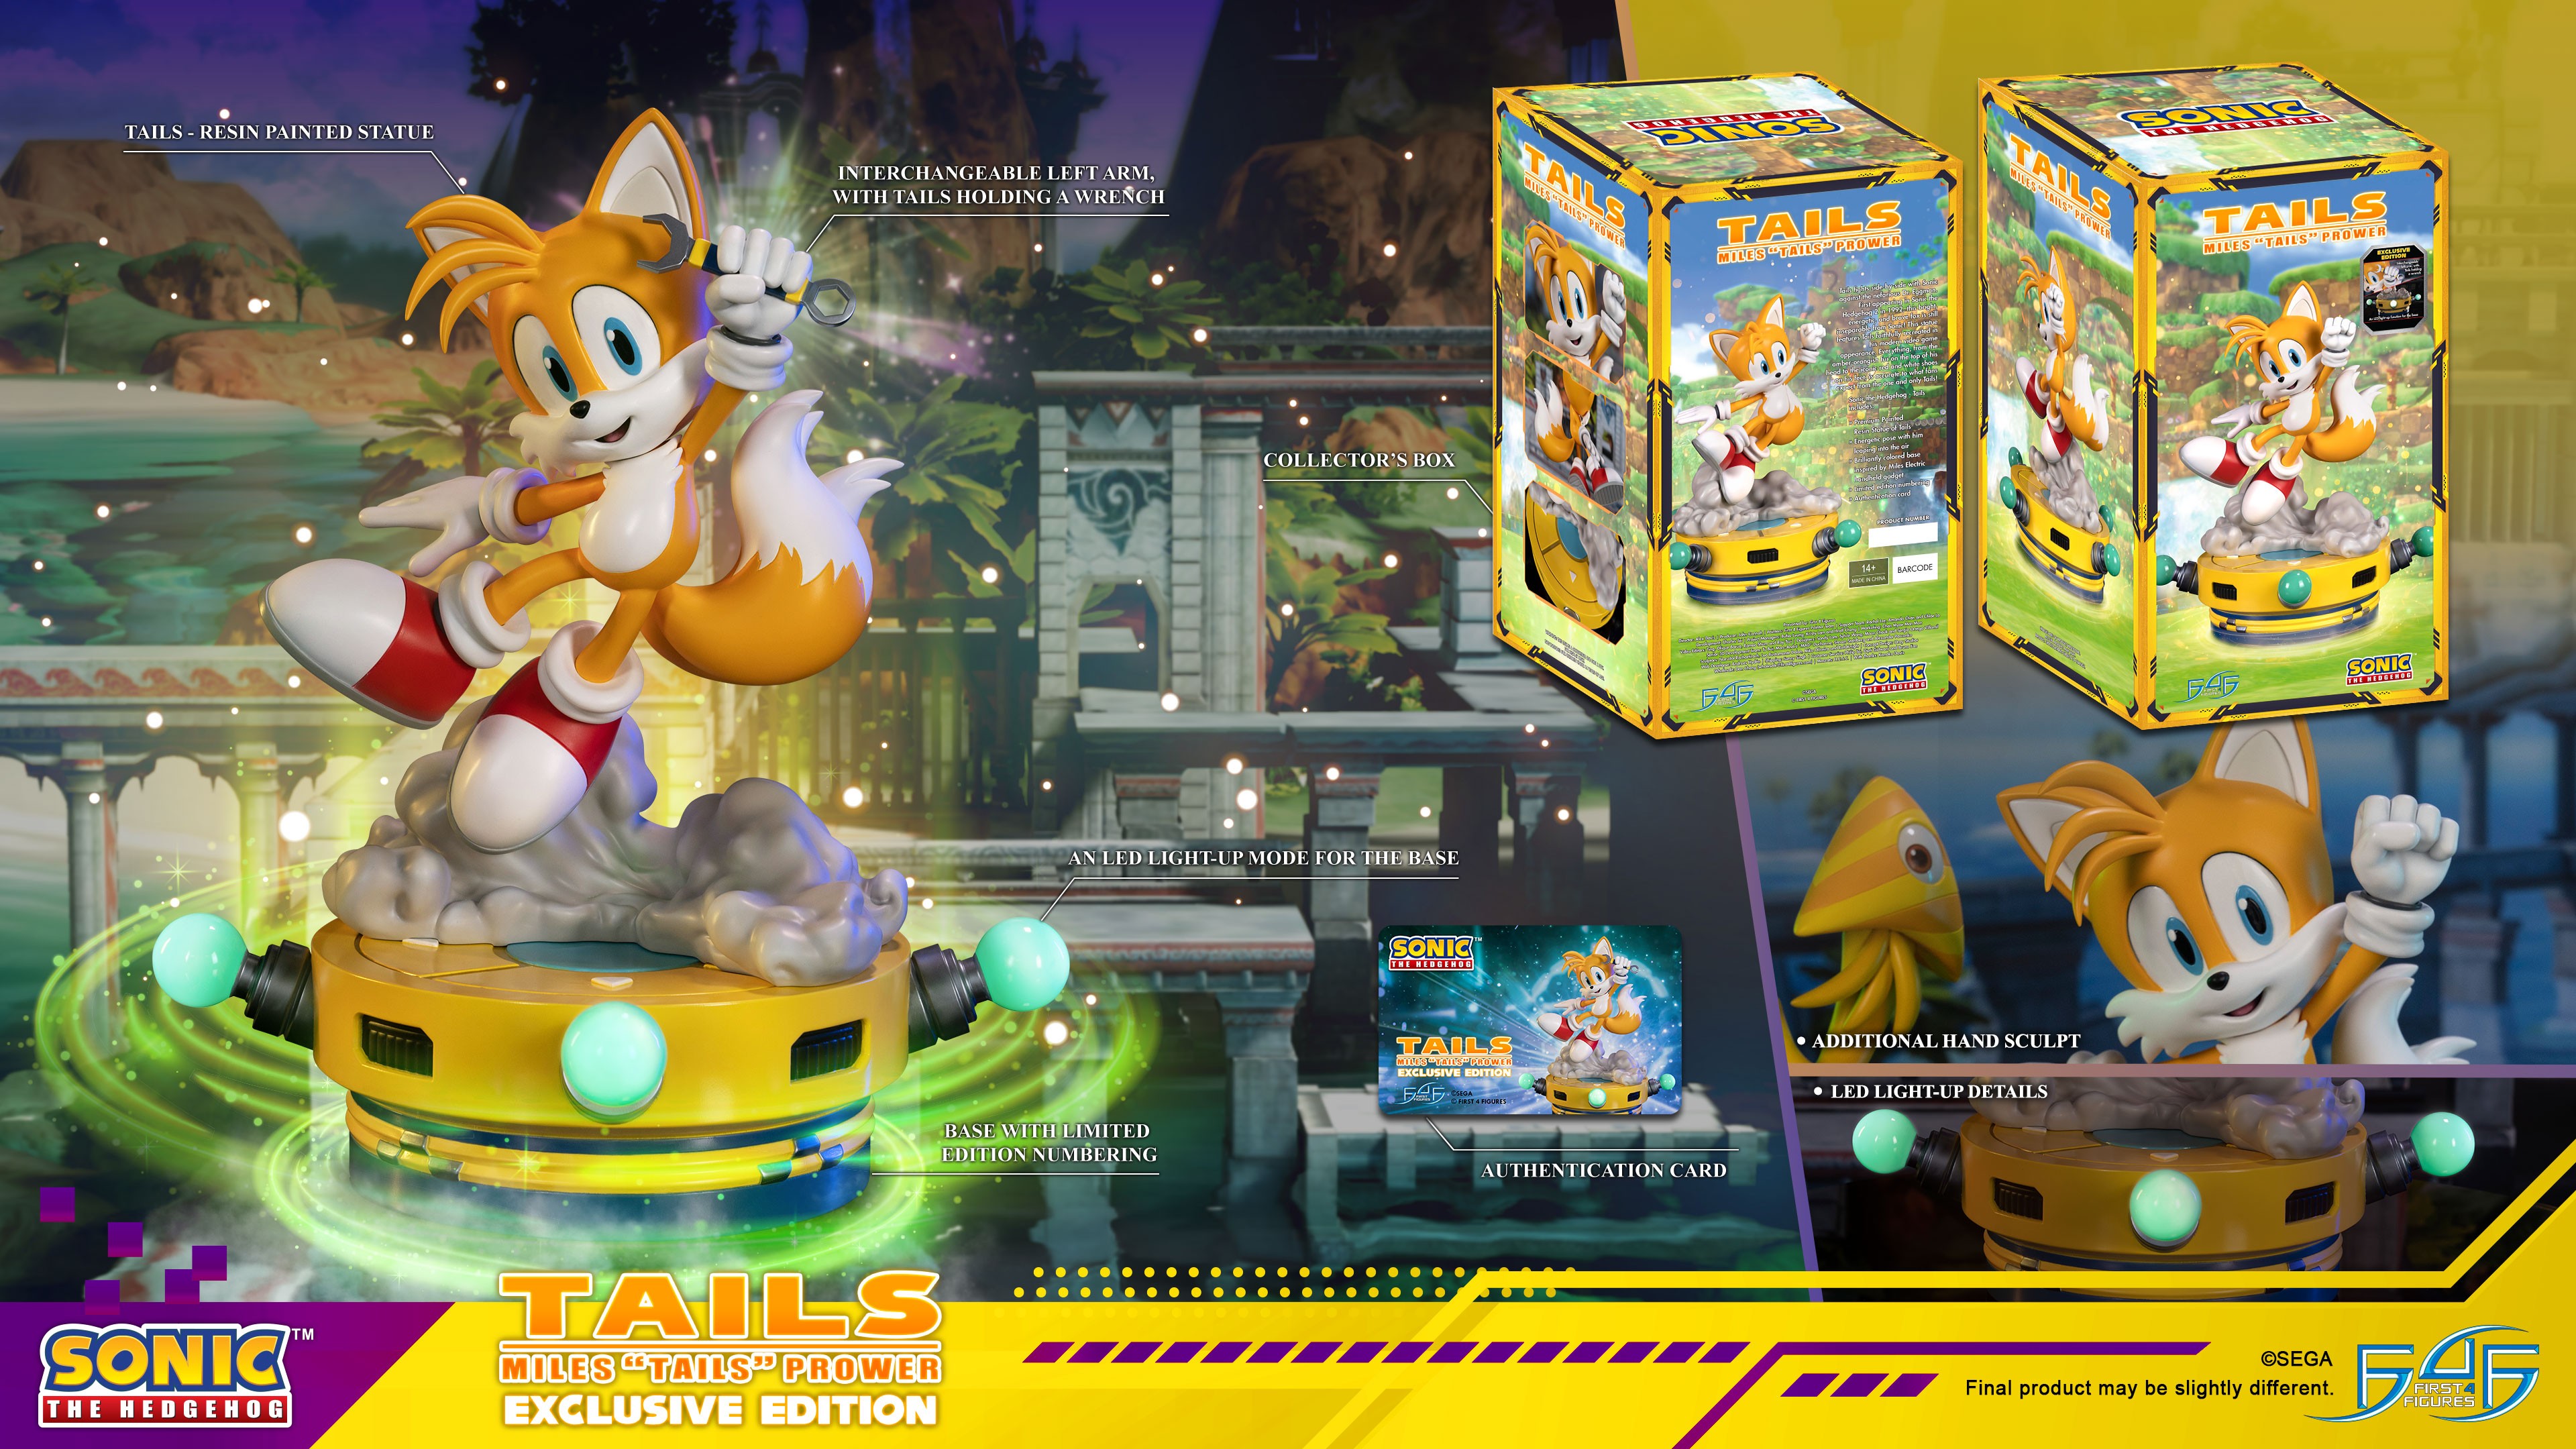 Sonic The Hedgehog - Tails Exclusive Edition 